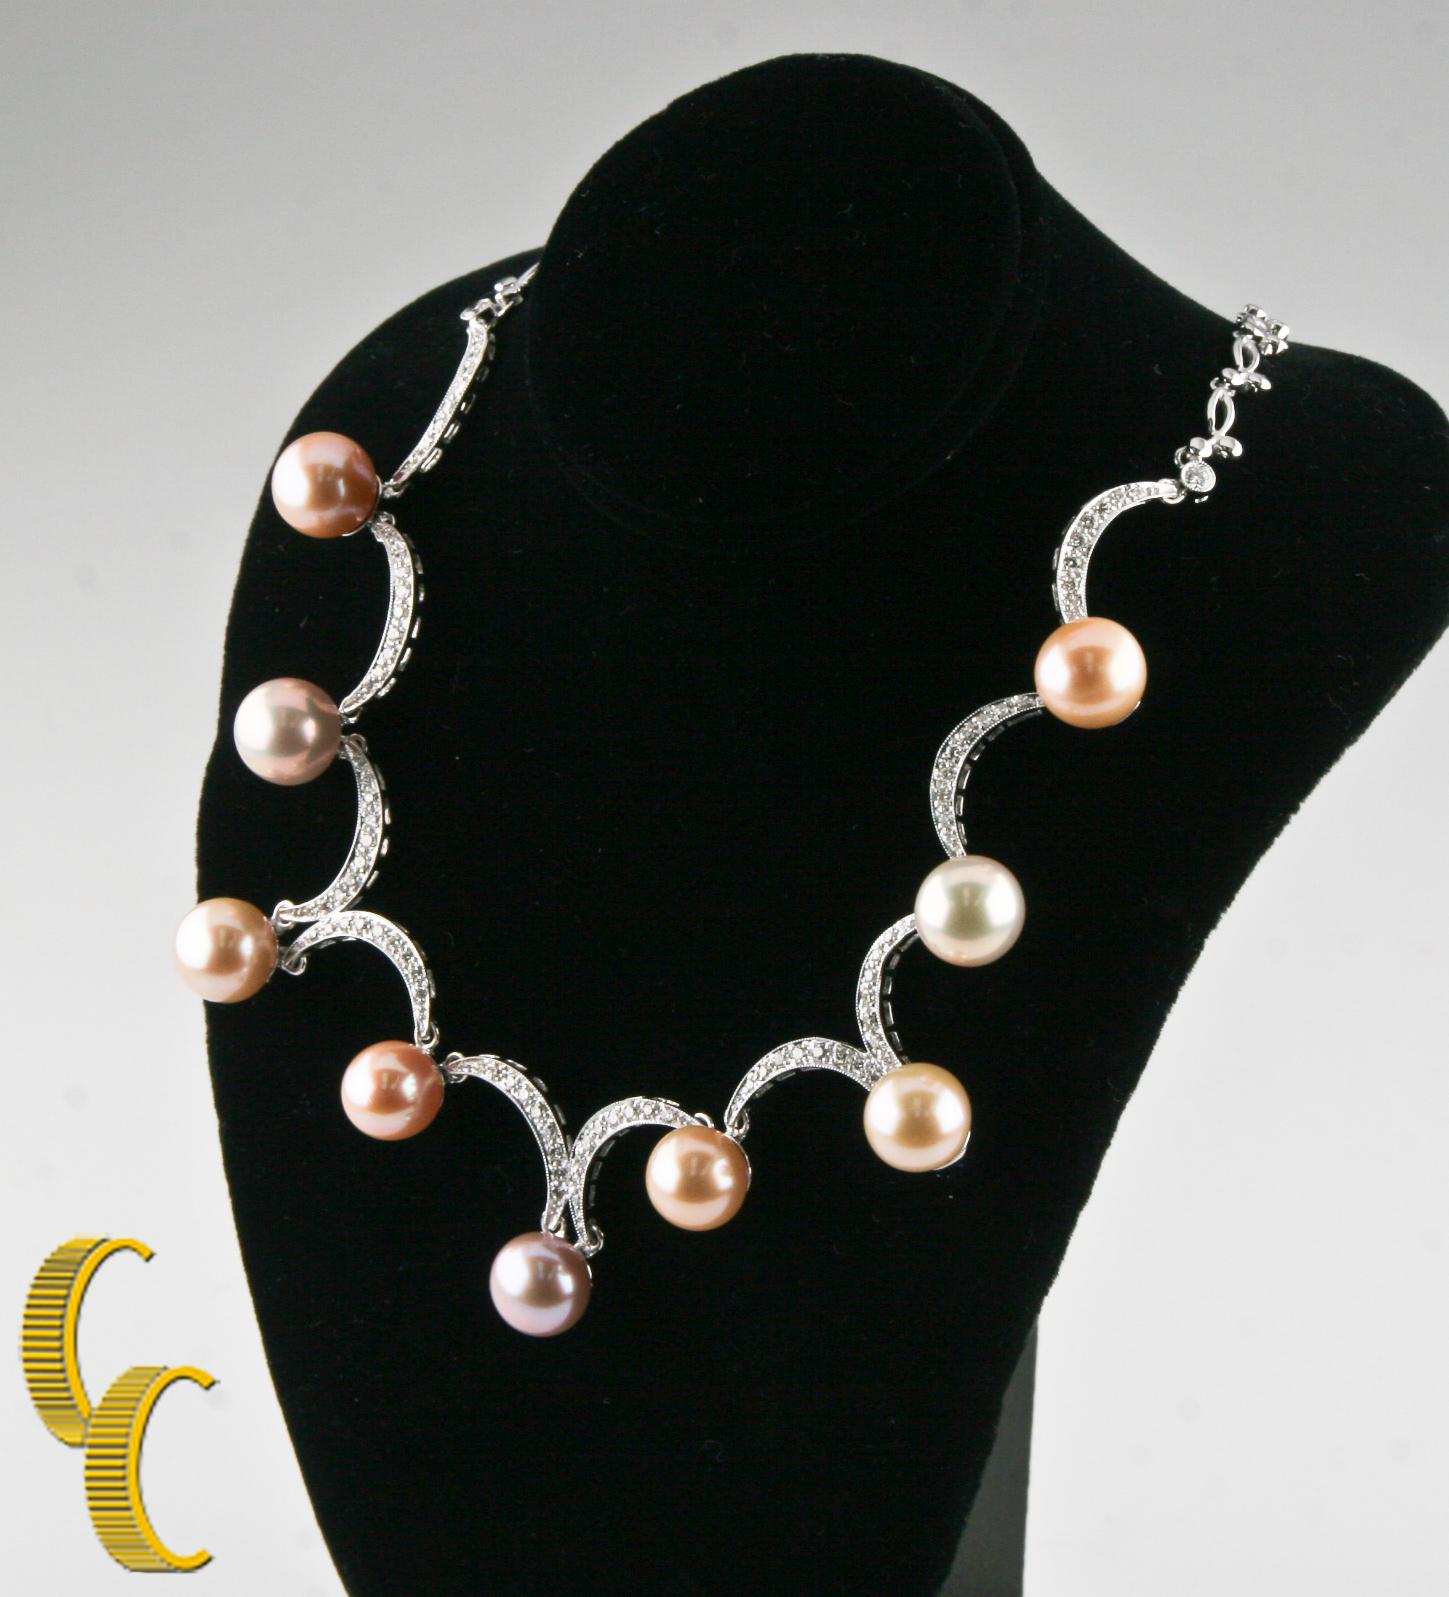 One electronically tested 18KT white gold ladies cast & assembled freshwater cultured pearl and diamond necklace.
Condition is good.
Ladies 18KT White Gold Multi-Color Freshwater Cultured Pearl and Diamond Necklace
The sixteen inch length necklace